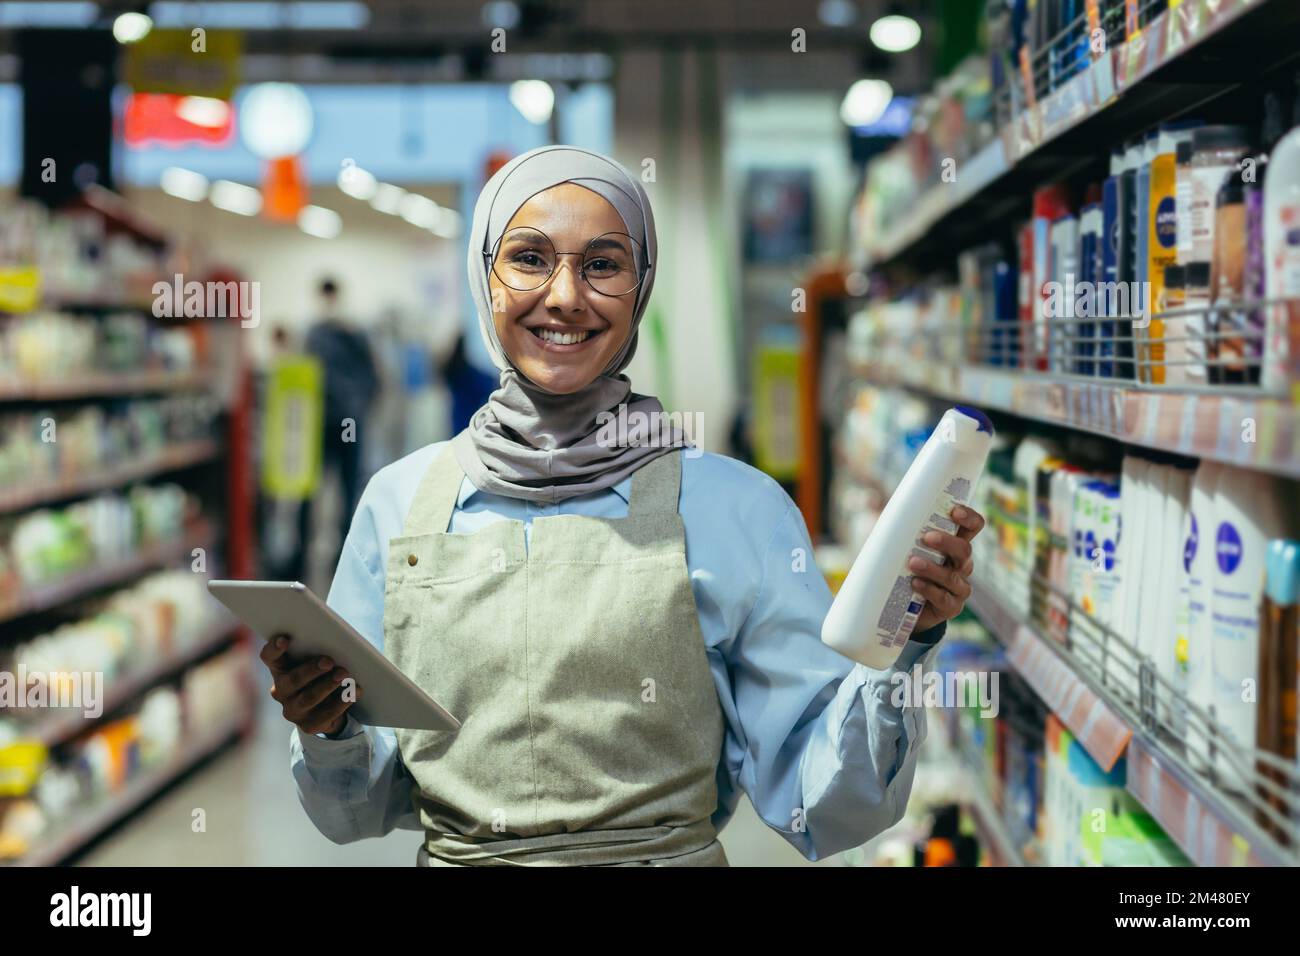 Portrait of a female saleswoman in a hijab, a salesperson in a household chemicals department is smiling and looking at the camera, holding a laptop tablet computer in her hands. Stock Photo